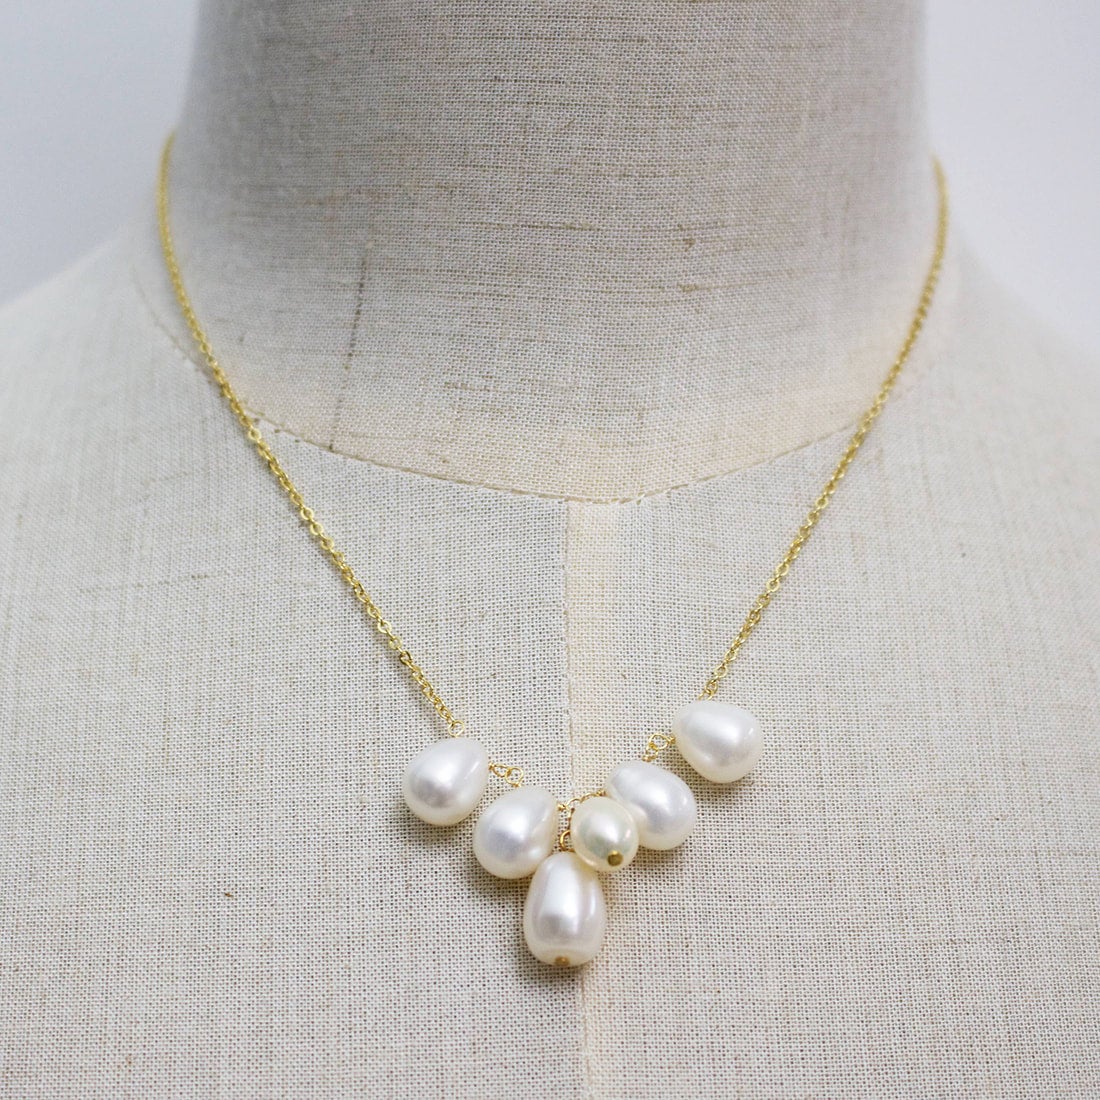 Women's White South Sea Shell Pearl Round Beads Pendant Cluster Necklace  16-32'' | eBay